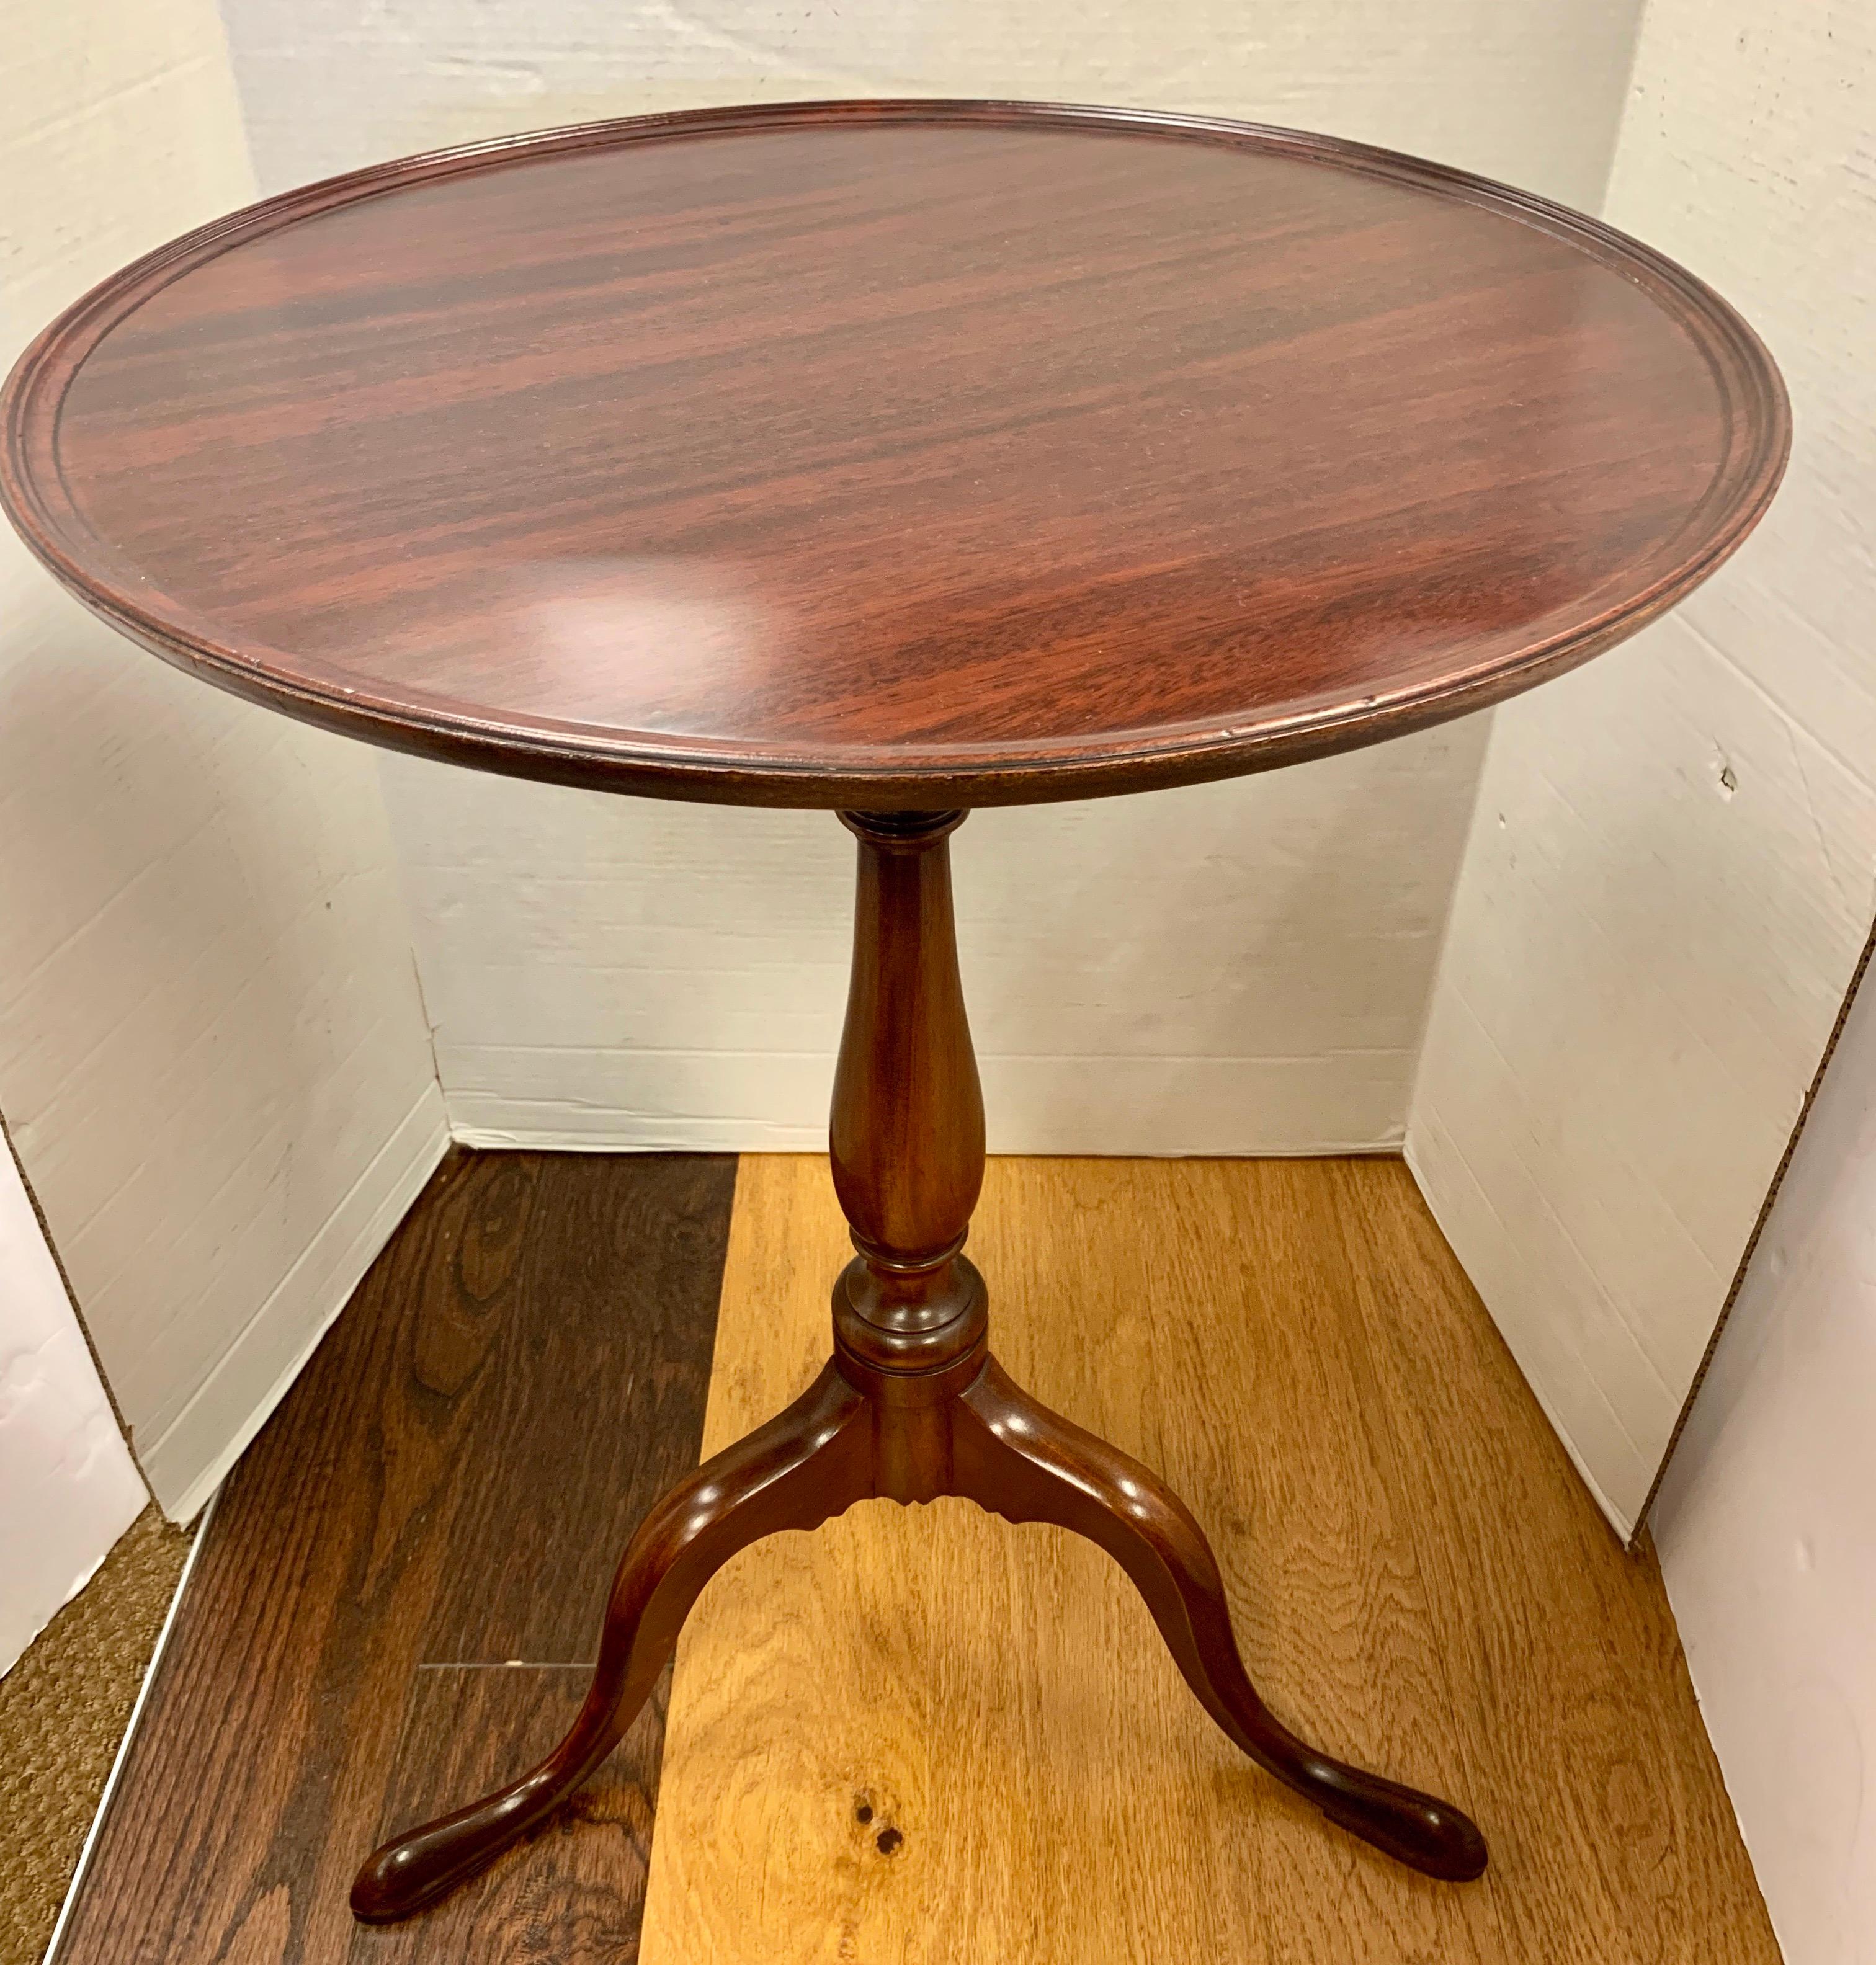 Rare signed Margolis cherry end table/candle stand on a tripod base rom Hartford, CT. It is signed on the bottom, see pictures attached.